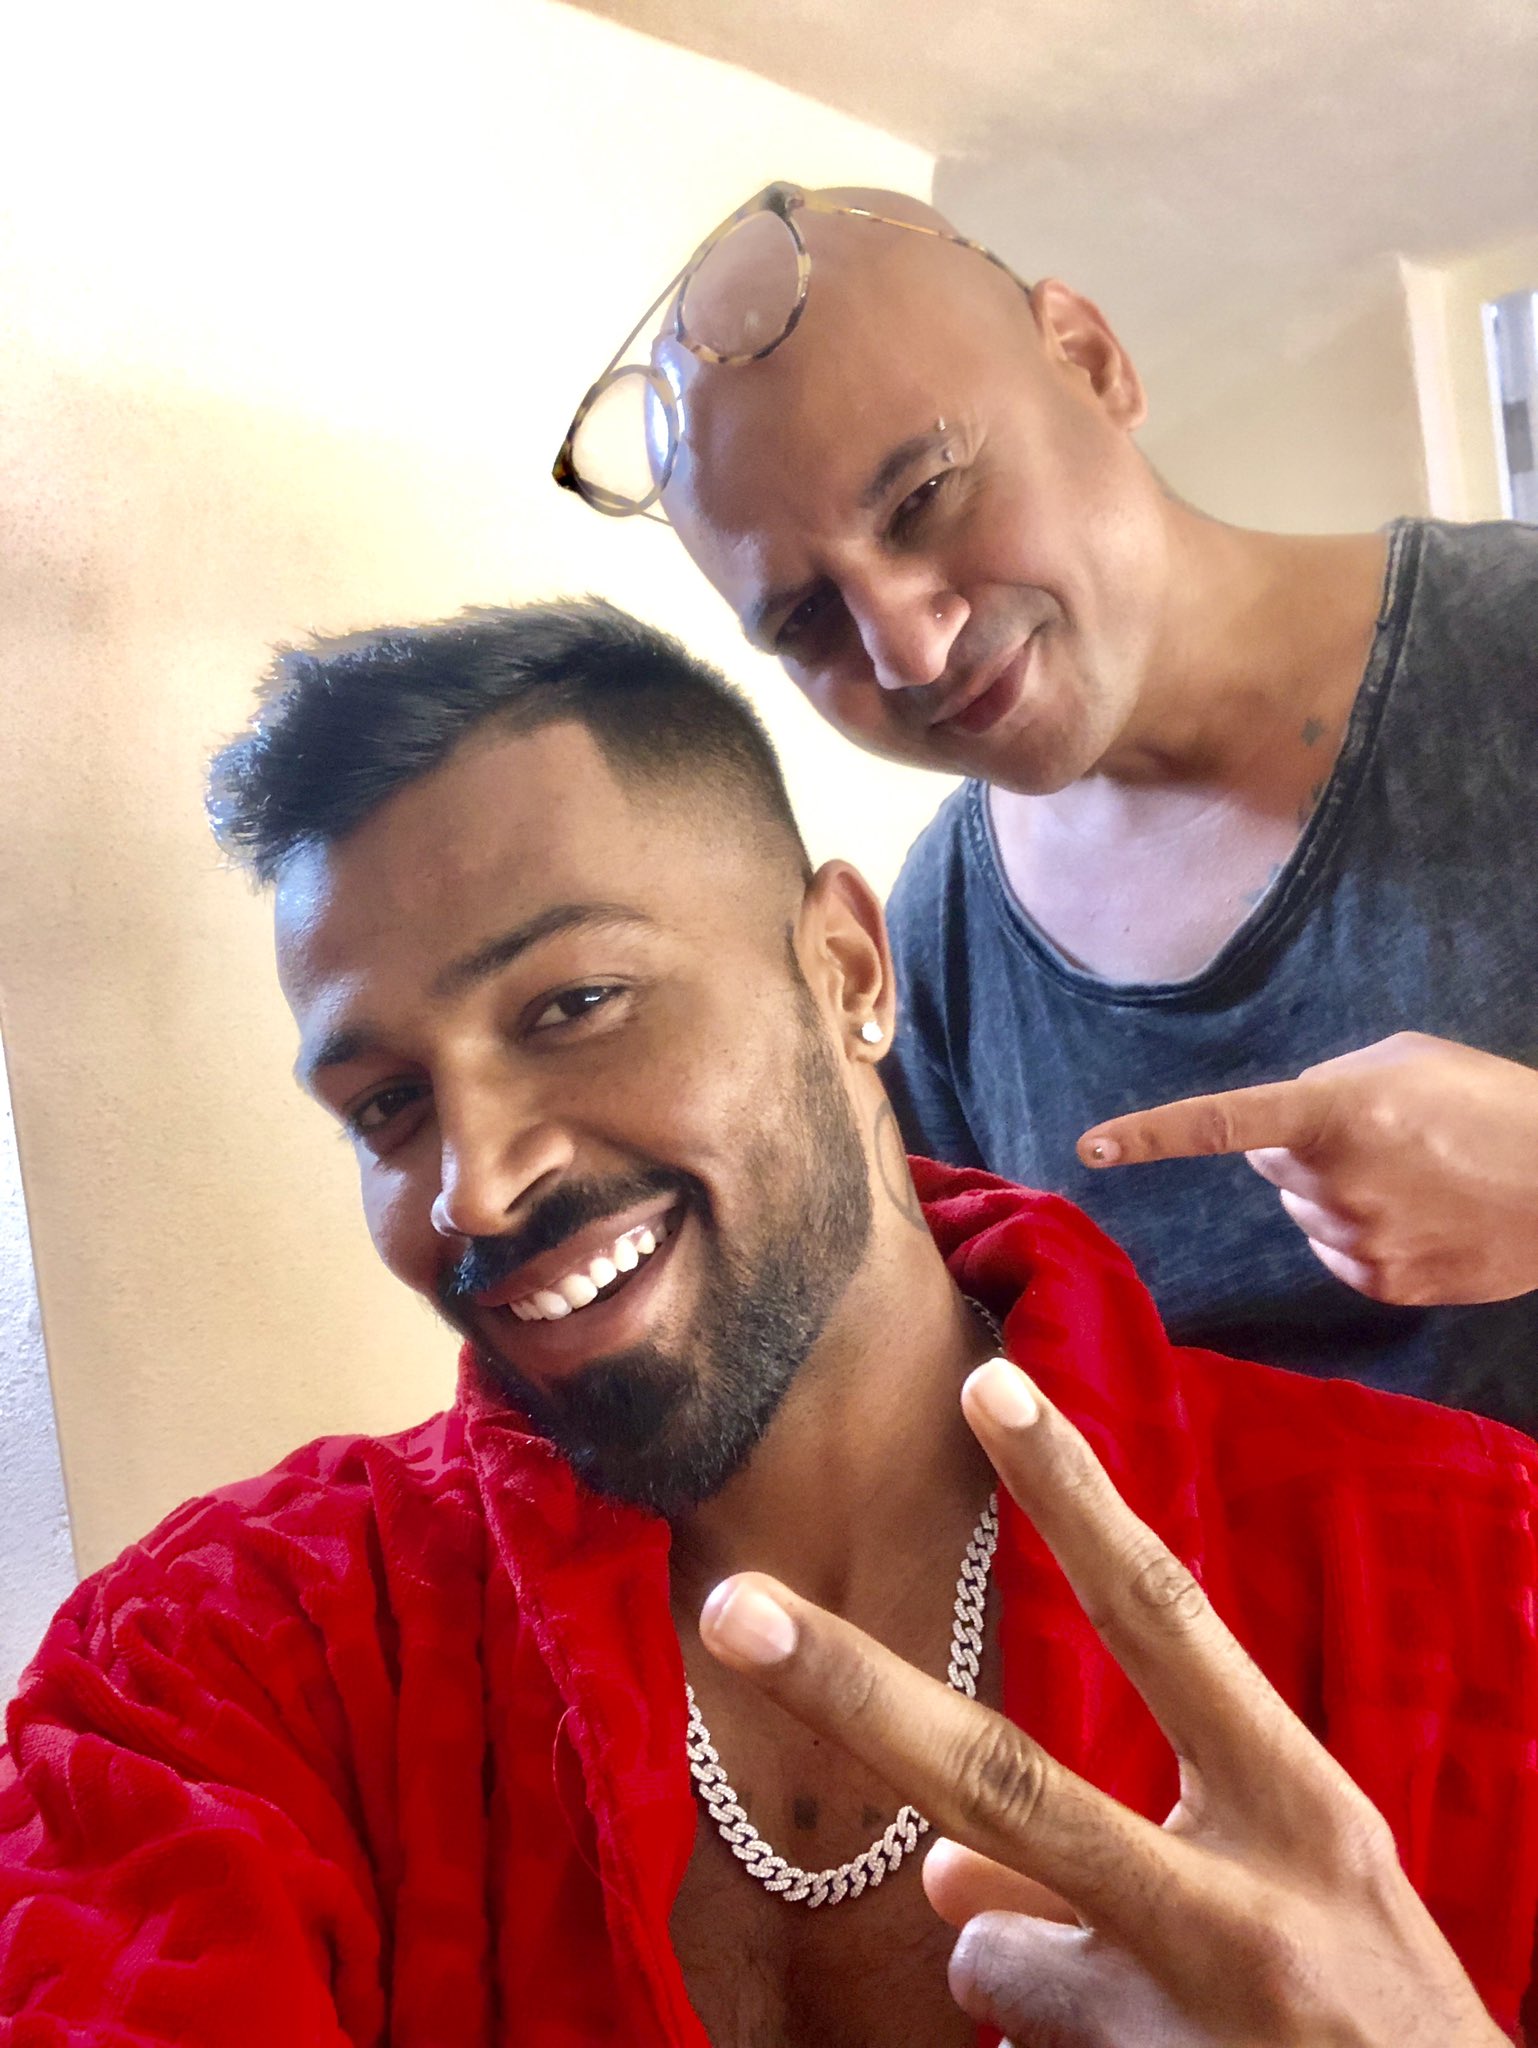 Colouring hair since I was 11, was born different: Hardik Pandya | Hair  color, Color, Hair